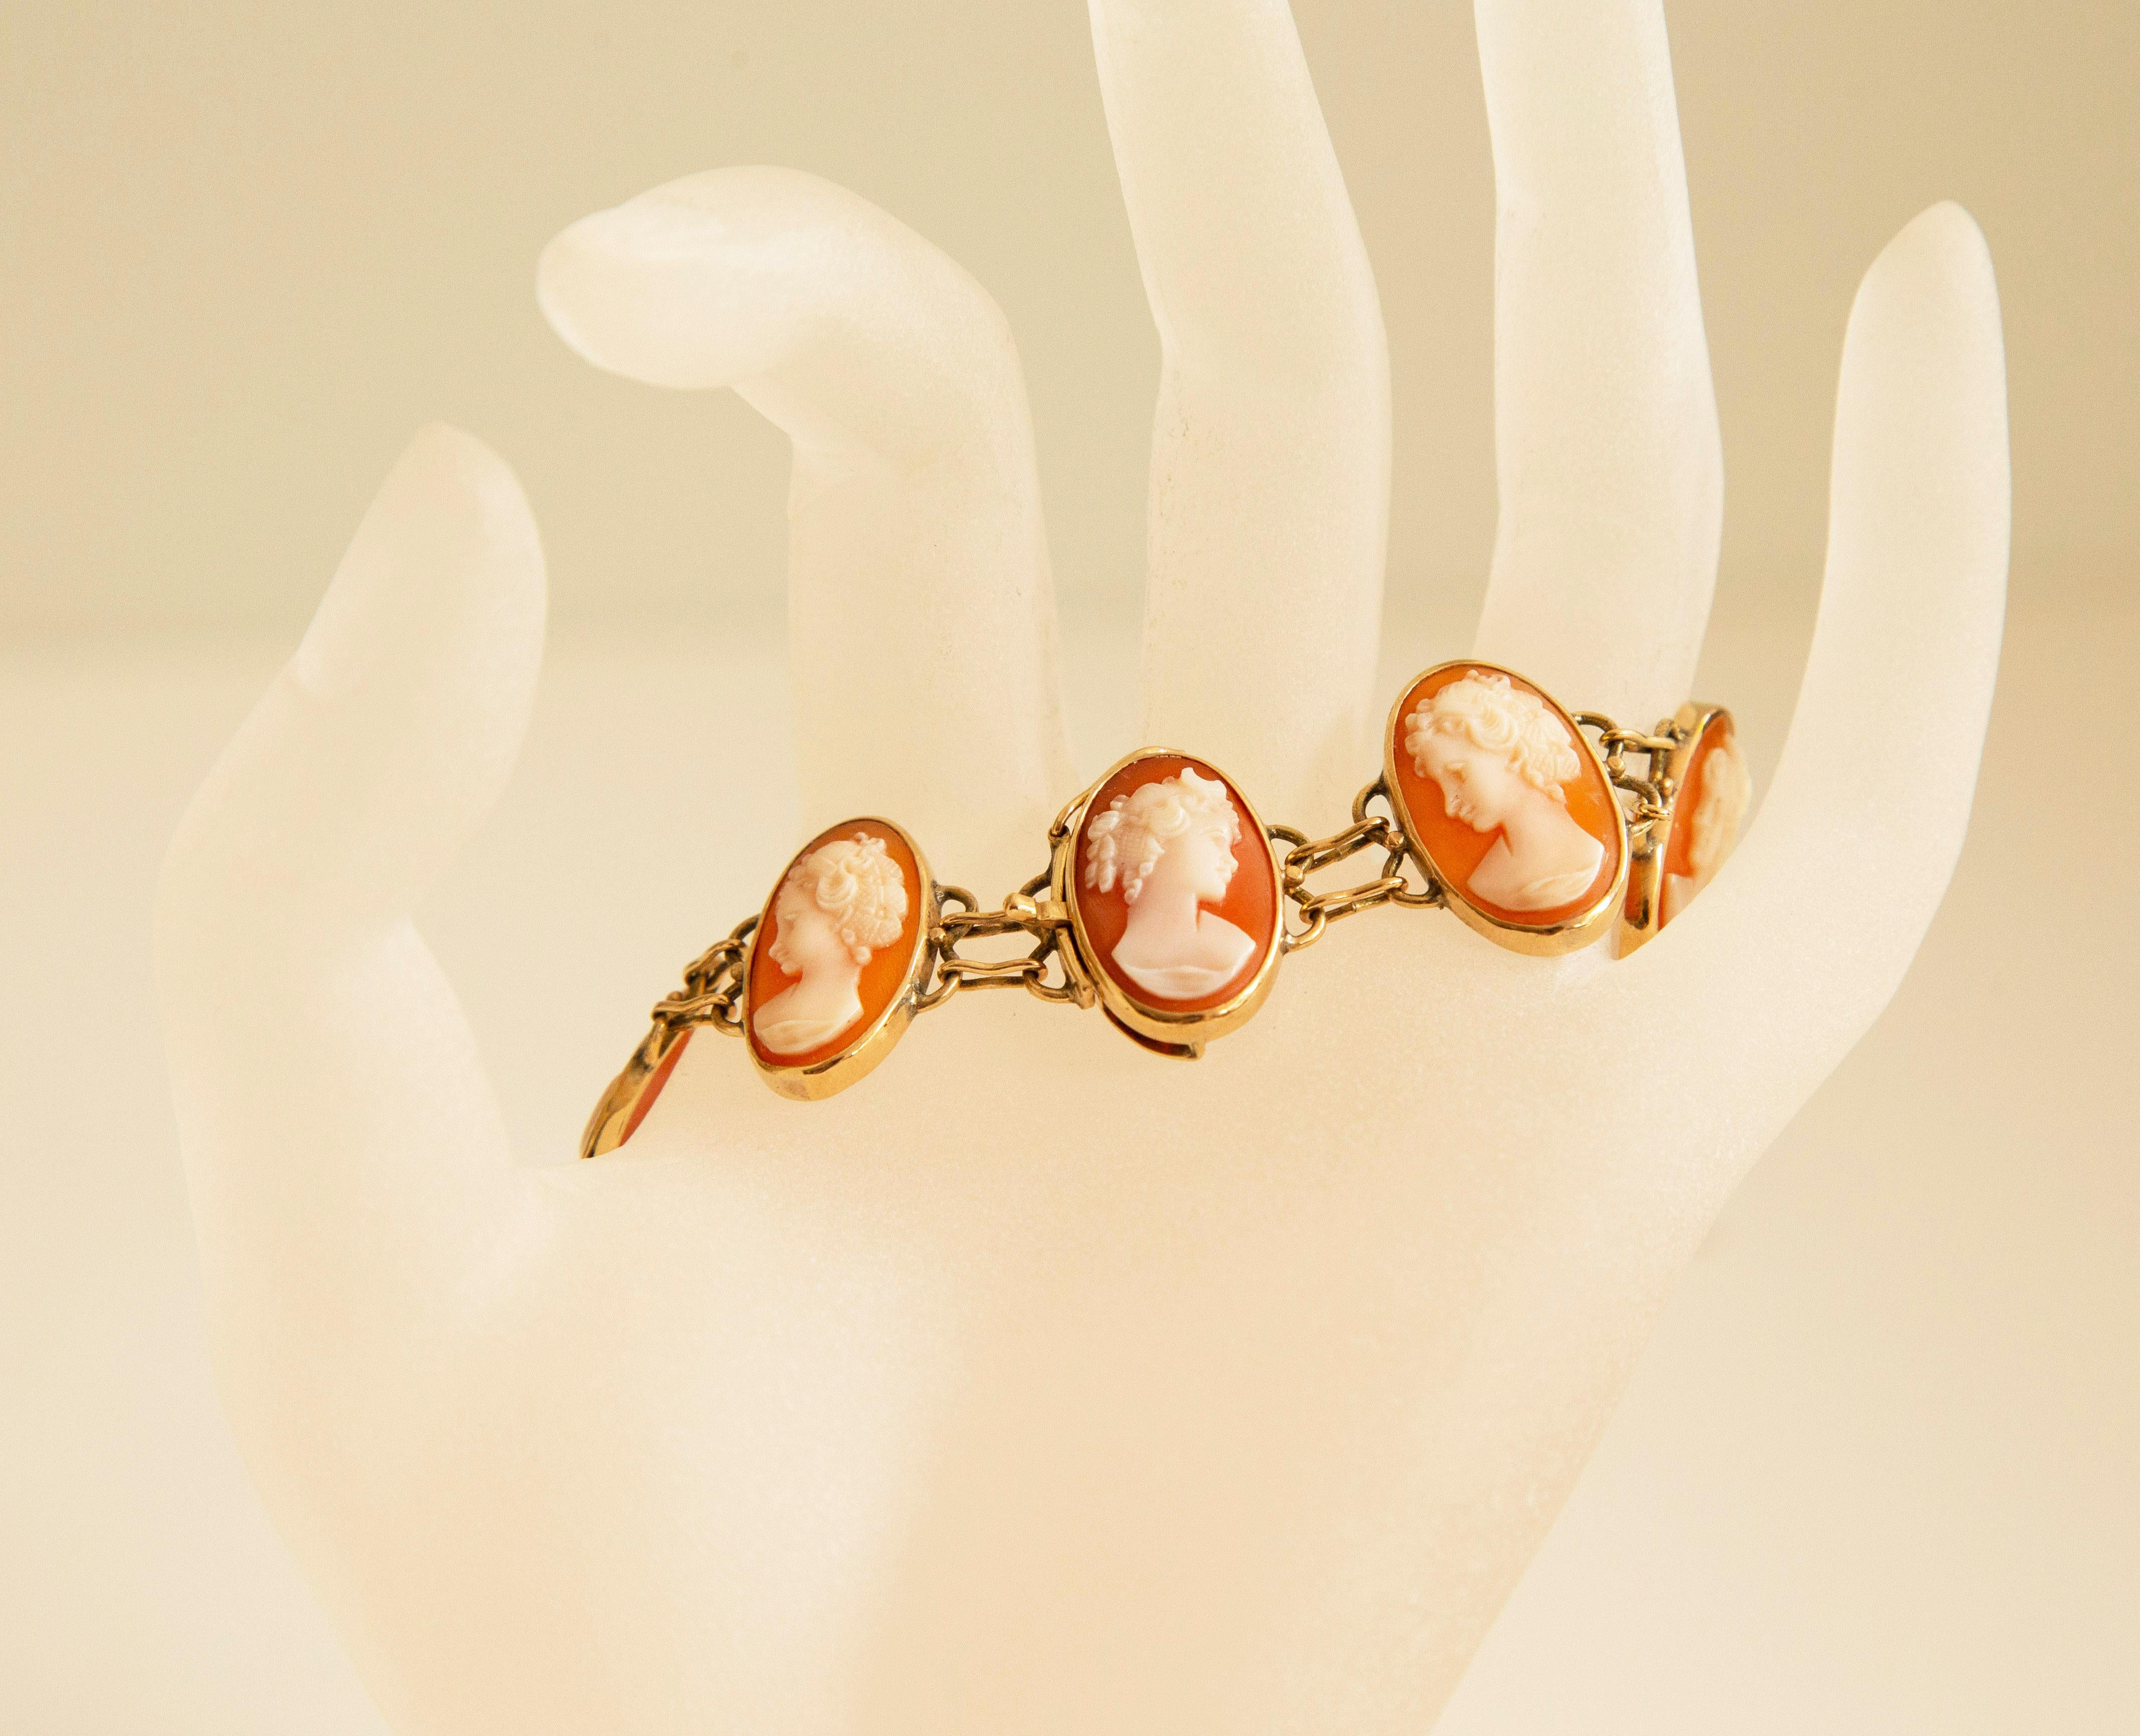 A vintage 14 karat (krt) yellow gold and hand carved shell cameo link bracelet. The bracelet features nine cameos in oval 14 krt setting. Each cameo features an unique female silhouette in the Victorian style. The bracelet closure is stamped with